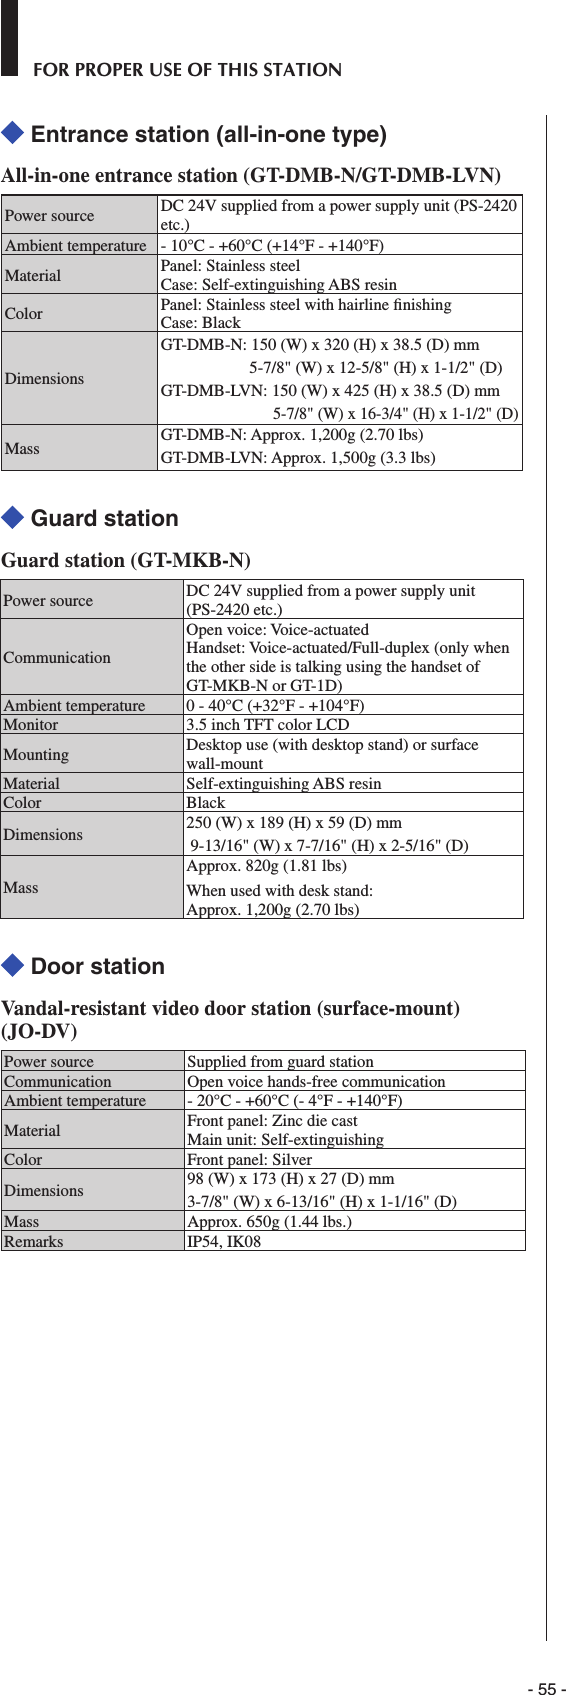 - 55 -FOR PROPER USE OF THIS STATION Entrance station (all-in-one type)All-in-one entrance station (GT-DMB-N/GT-DMB-LVN)Power source DC 24V supplied from a power supply unit (PS-2420 etc.)Ambient temperature - 10°C - +60°C (+14°F - +140°F)Material Panel: Stainless steelCase: Self-extinguishing ABS resinColor Panel: Stainless steel with hairline ﬁ nishingCase: BlackDimensionsGT-DMB-N: 150 (W) x 320 (H) x 38.5 (D) mm5-7/8&quot; (W) x 12-5/8&quot; (H) x 1-1/2&quot; (D)GT-DMB-LVN: 150 (W) x 425 (H) x 38.5 (D) mm5-7/8&quot; (W) x 16-3/4&quot; (H) x 1-1/2&quot; (D)Mass GT-DMB-N: Approx. 1,200g (2.70 lbs)GT-DMB-LVN: Approx. 1,500g (3.3 lbs) Guard stationGuard station (GT-MKB-N)Power source DC 24V supplied from a power supply unit (PS-2420 etc.)CommunicationOpen voice: Voice-actuatedHandset: Voice-actuated/Full-duplex (only when the other side is talking using the handset of GT-MKB-N or GT-1D)Ambient temperature 0 - 40°C (+32°F - +104°F)Monitor 3.5 inch TFT color LCDMounting Desktop use (with desktop stand) or surface wall-mountMaterial Self-extinguishing ABS resinColor BlackDimensions 250 (W) x 189 (H) x 59 (D) mm 9-13/16&quot; (W) x 7-7/16&quot; (H) x 2-5/16&quot; (D)MassApprox. 820g (1.81 lbs) When used with desk stand: Approx. 1,200g (2.70 lbs) Door stationVandal-resistant video door station (surface-mount) (JO-DV)Power source Supplied from guard stationCommunication Open voice hands-free communicationAmbient temperature - 20°C - +60°C (- 4°F - +140°F)Material Front panel: Zinc die cast Main unit: Self-extinguishingColor Front panel: SilverDimensions 98 (W) x 173 (H) x 27 (D) mm3-7/8&quot; (W) x 6-13/16&quot; (H) x 1-1/16&quot; (D)Mass Approx. 650g (1.44 lbs.)Remarks IP54, IK08